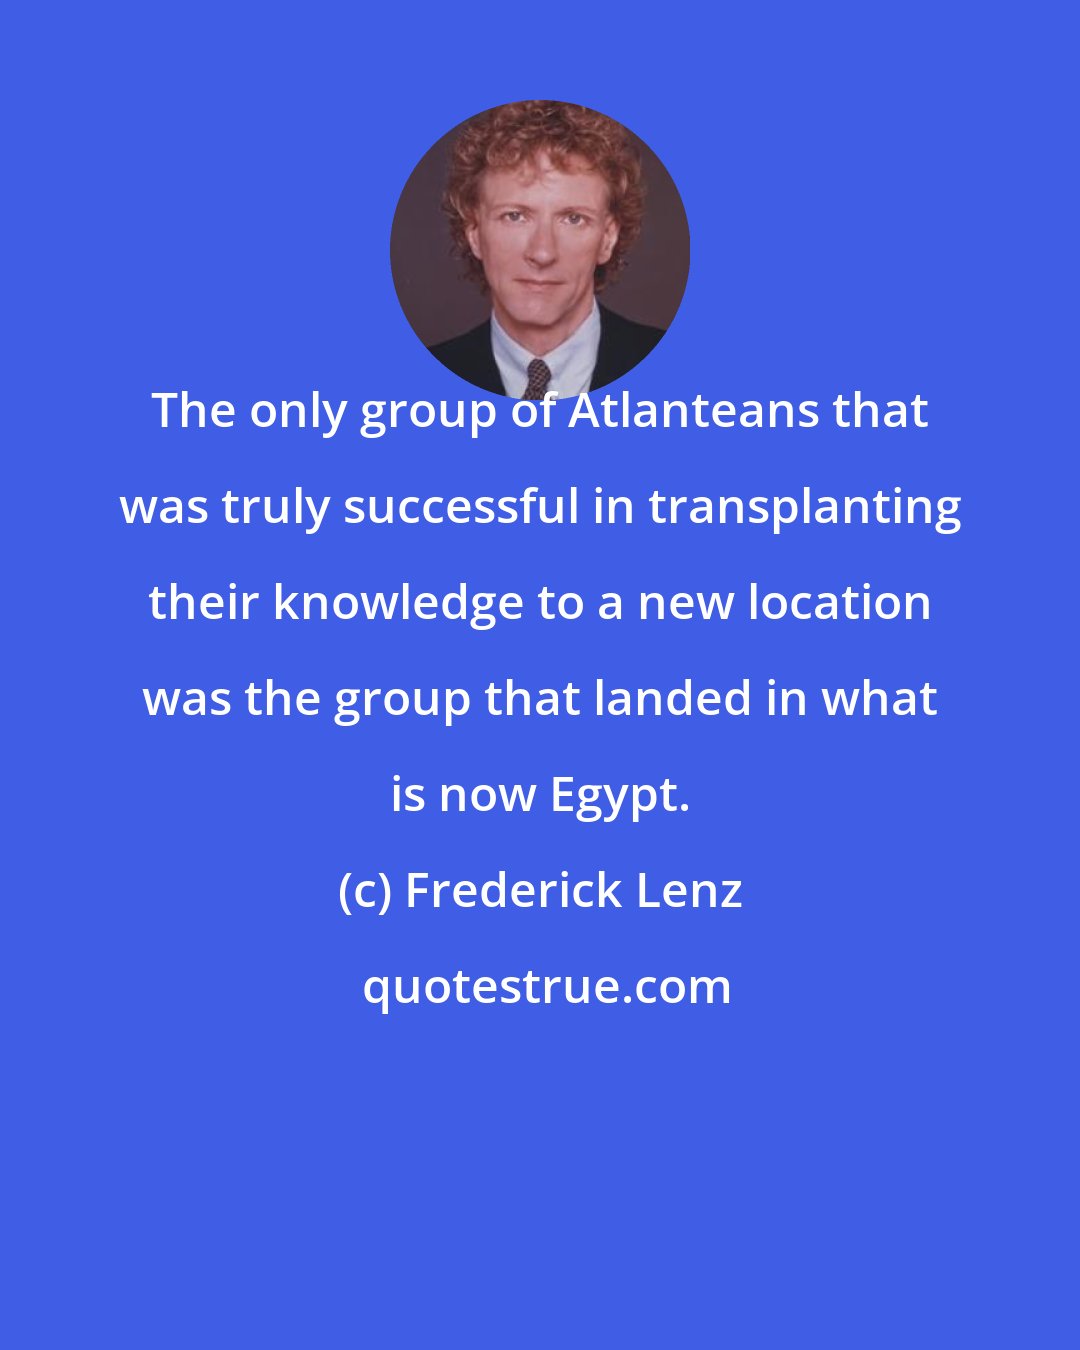 Frederick Lenz: The only group of Atlanteans that was truly successful in transplanting their knowledge to a new location was the group that landed in what is now Egypt.